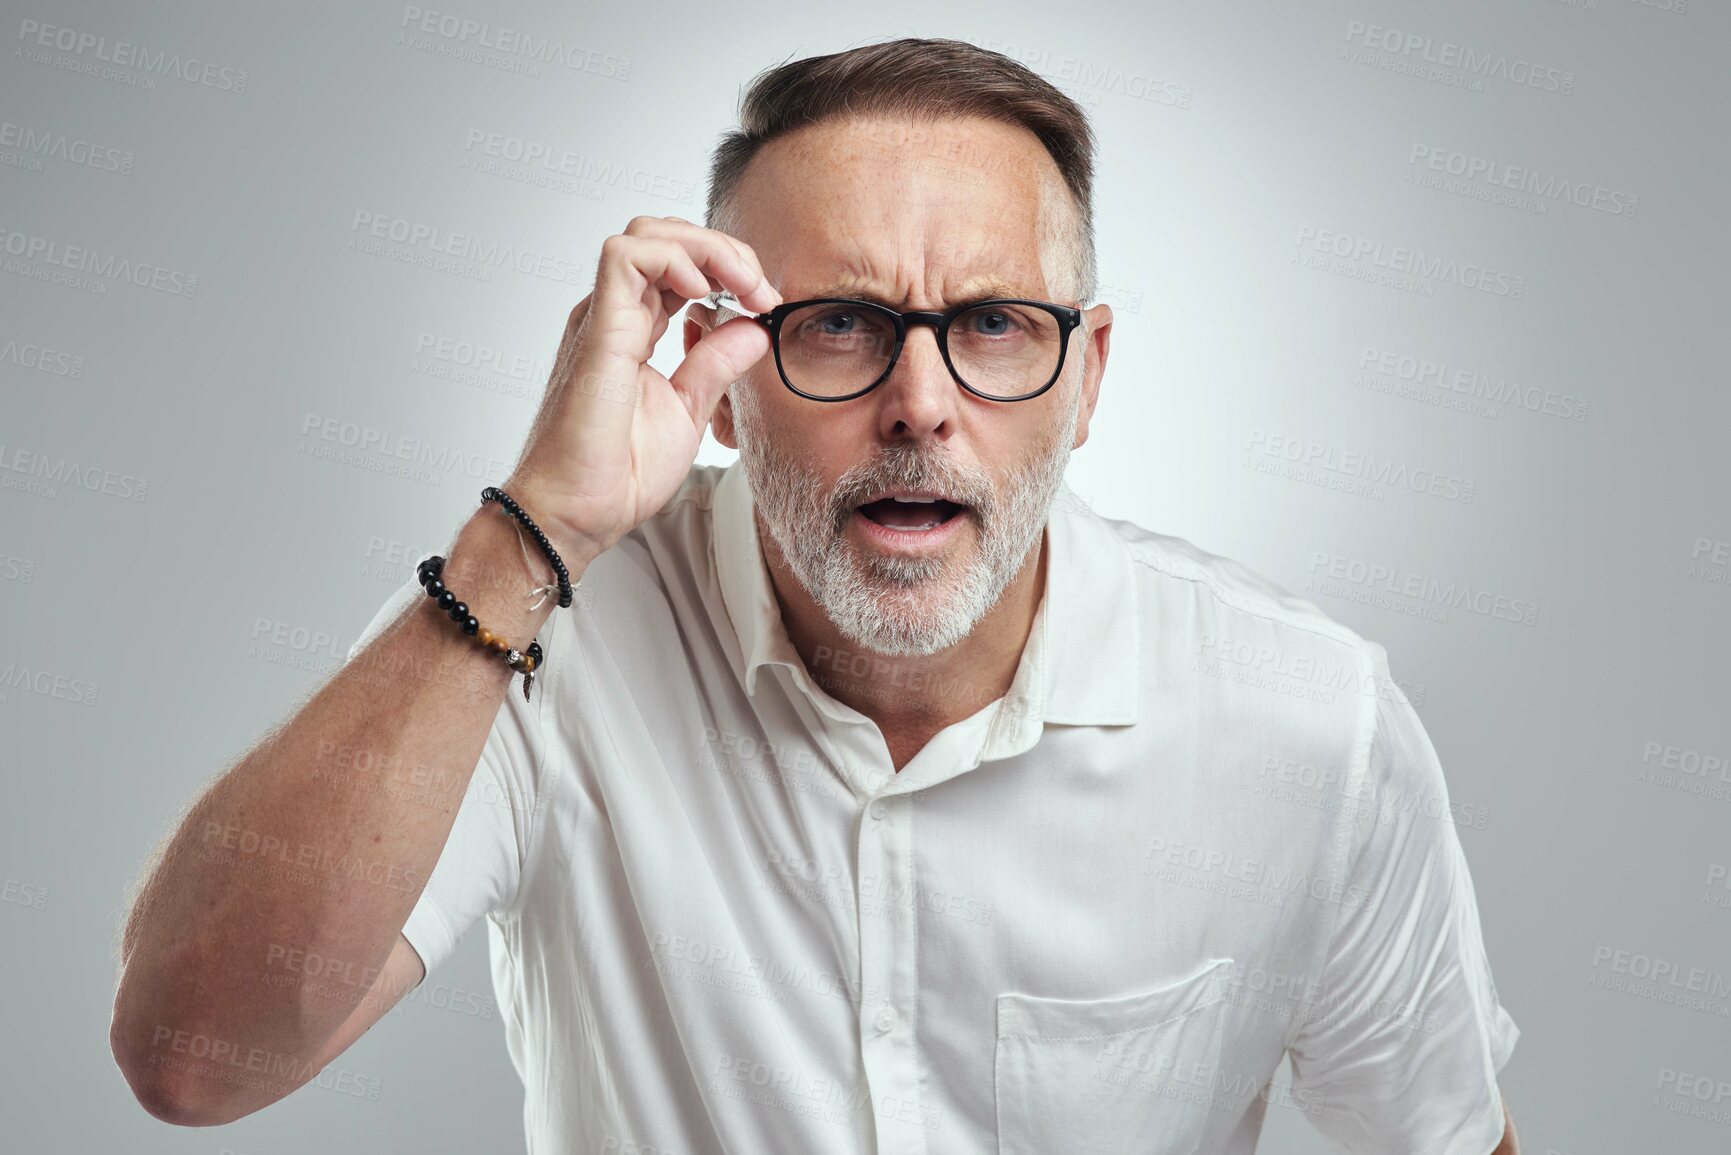 Buy stock photo Studio portrait of a mature man wearing spectacles and looking confused against a grey background